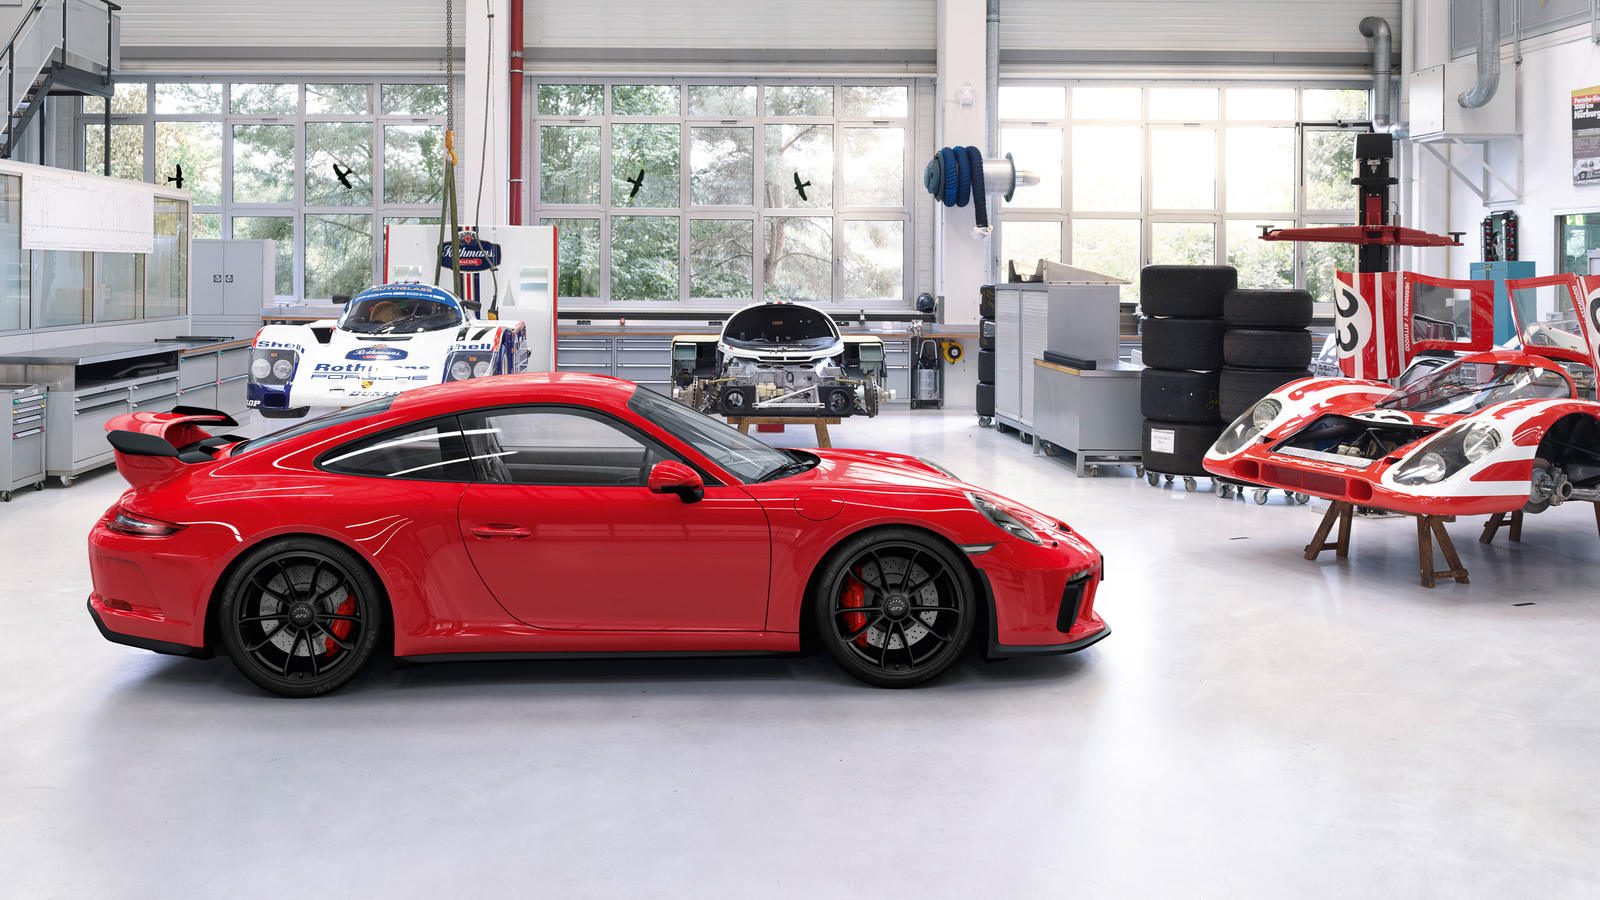 Price and Availability of the 2018 Porsche 911 GT3 in the UAE